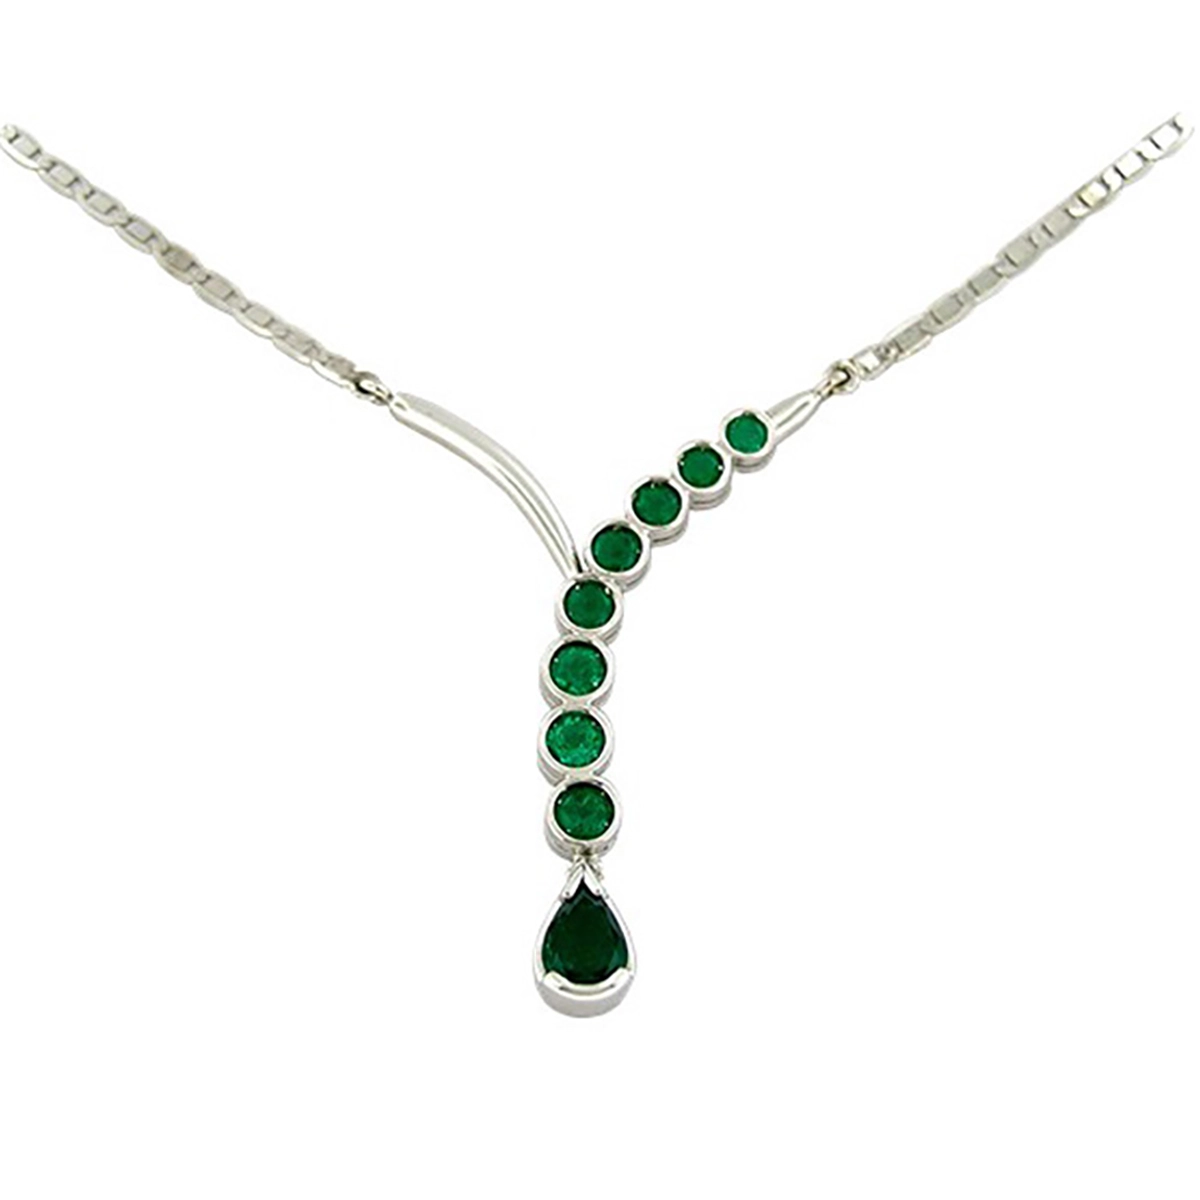 emerald-necklace-in-18k-white-gold-bezel-set-with-round-emeralds